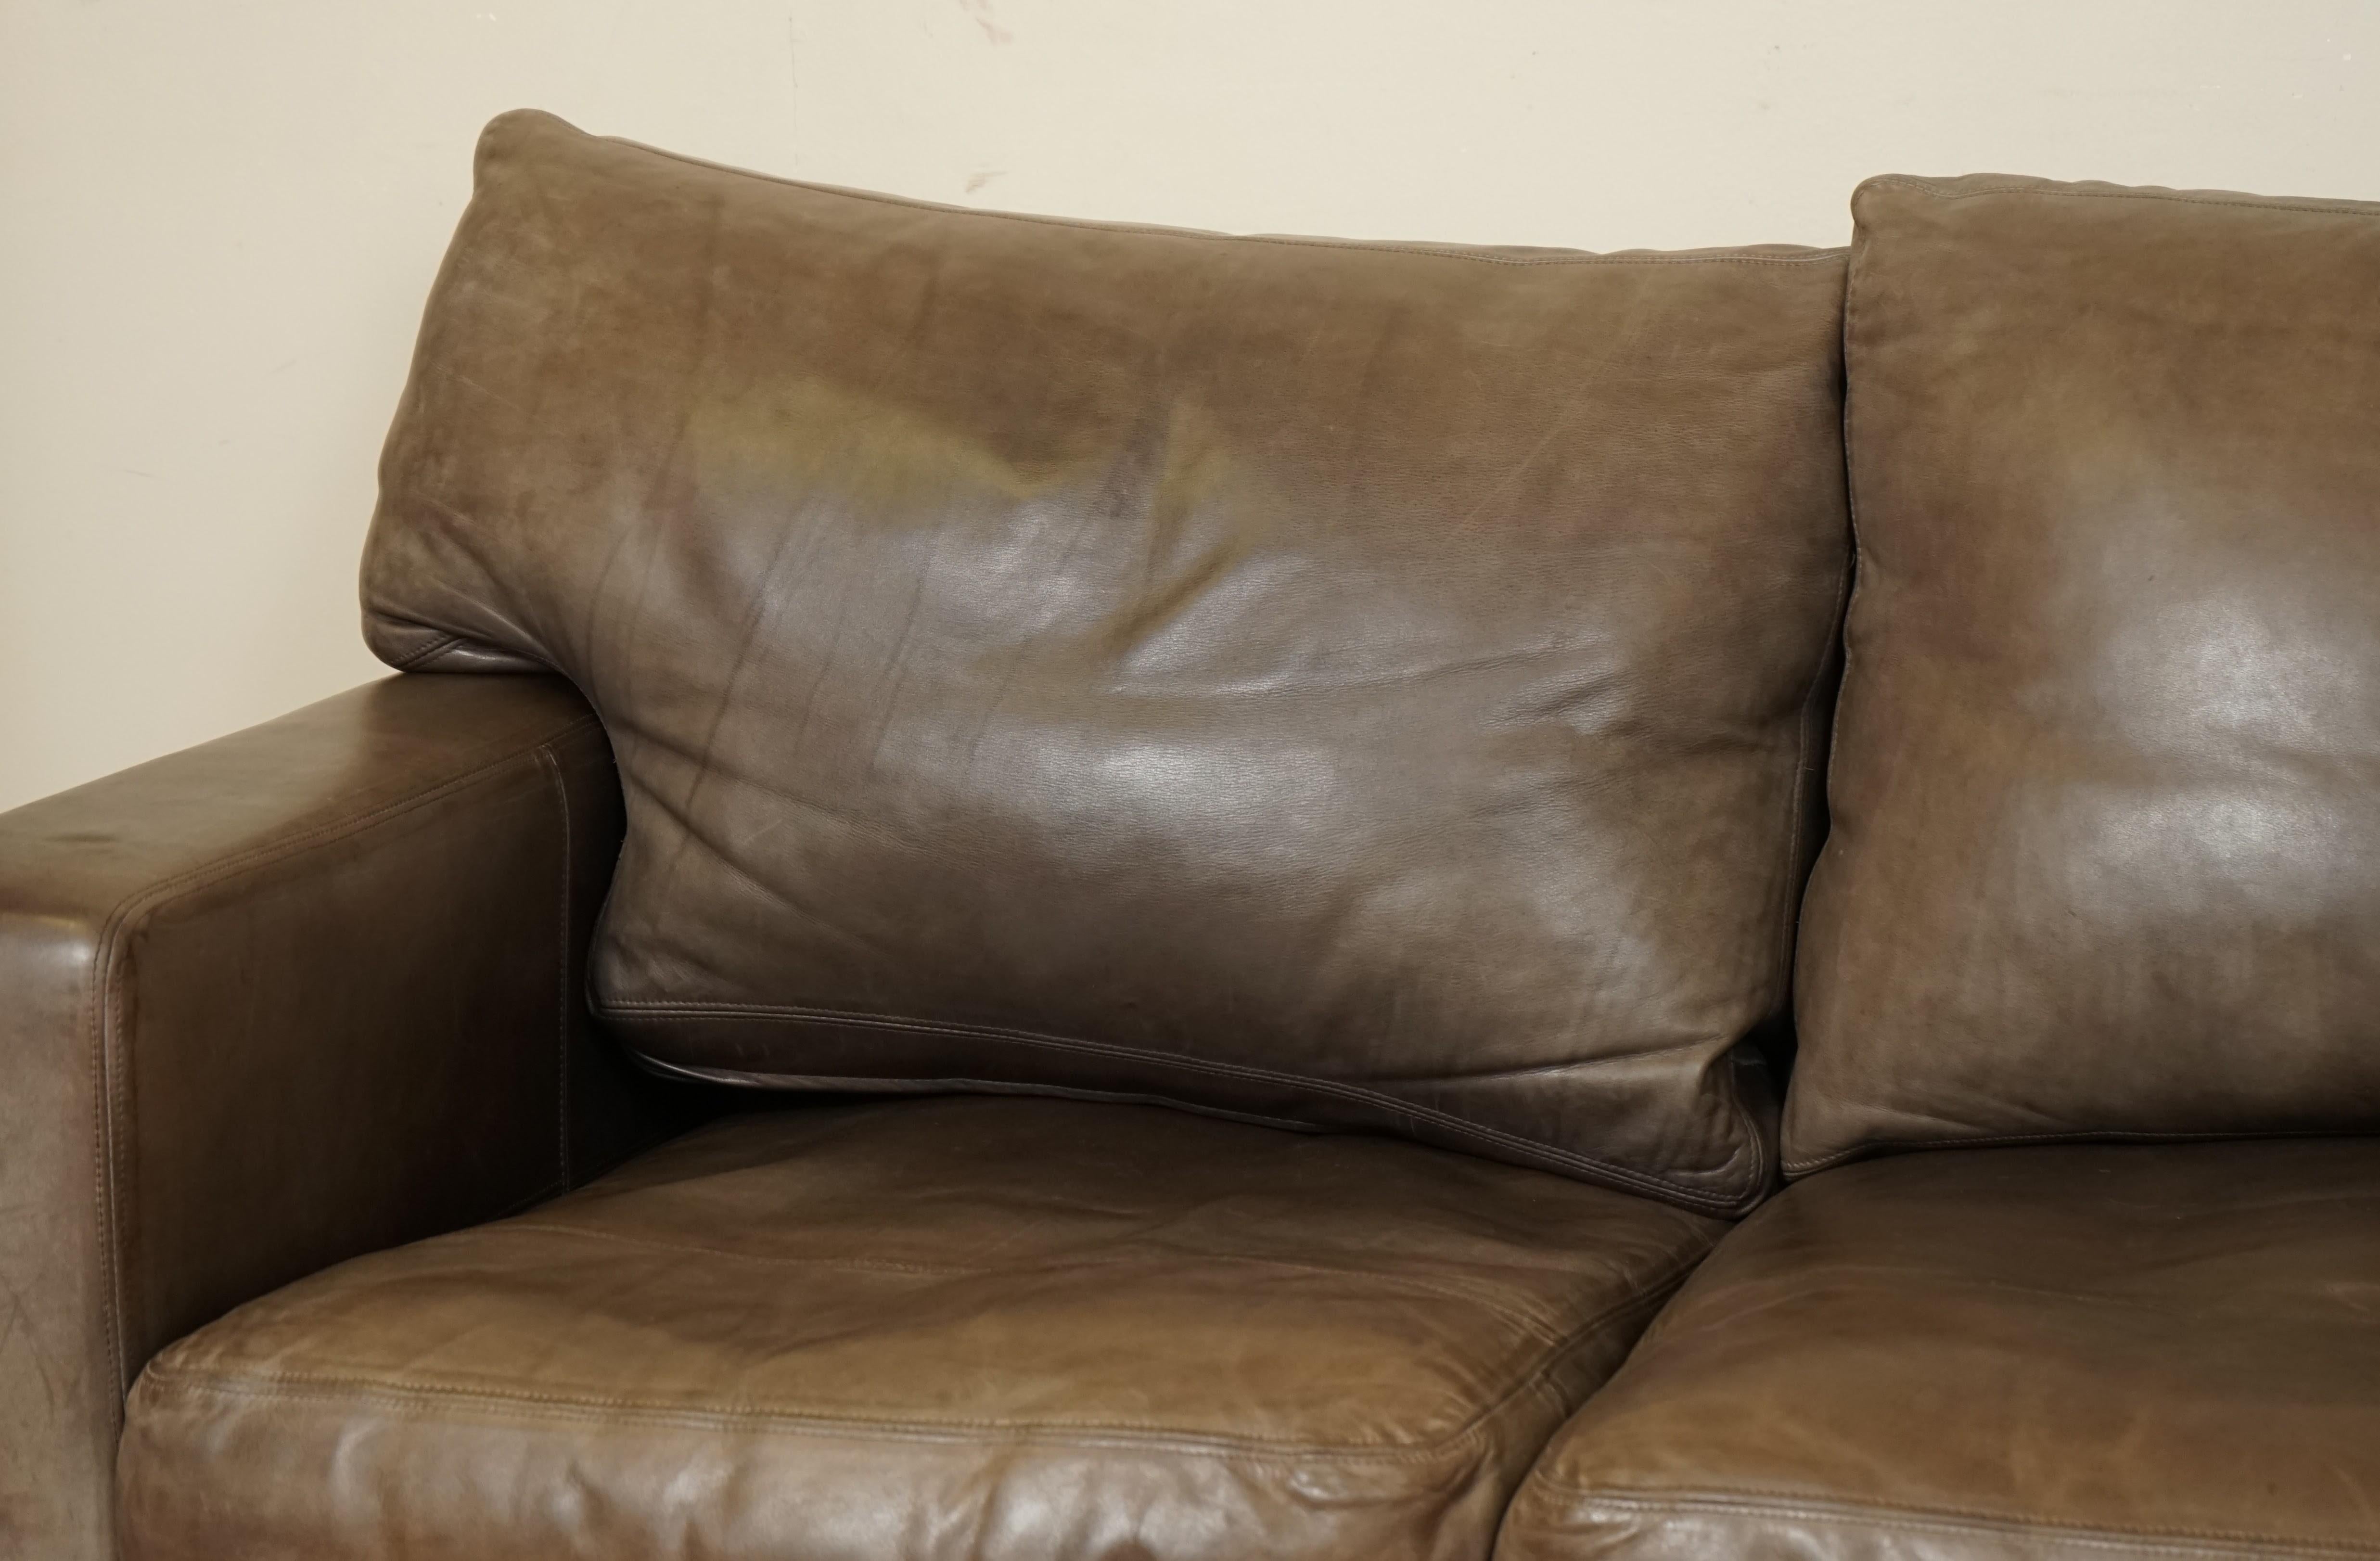 British Collins & Hayes Buttery Soft Leather Three Seater Sofa with Feather Filled Back